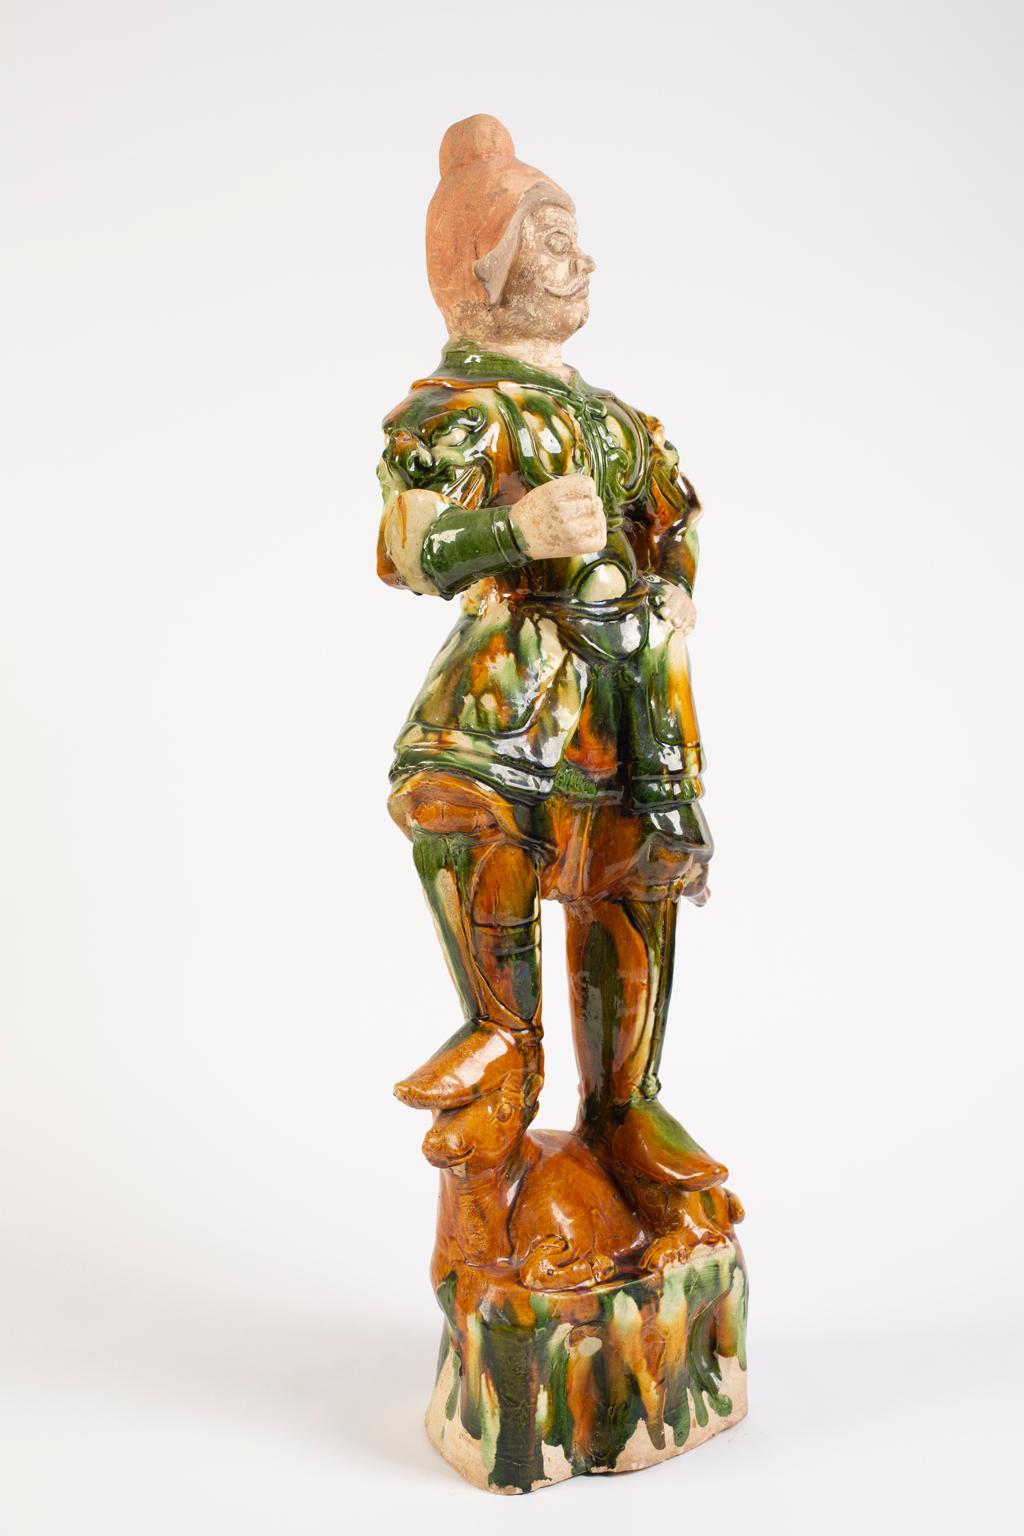 Chines Tang Dynasty sancai glazed pottery figure of a Guardian is a protector of the deceased. This warrior dressed in armor with a fierce face and imposing position would accompany the dead into the next life. Only the wealthy could afford such